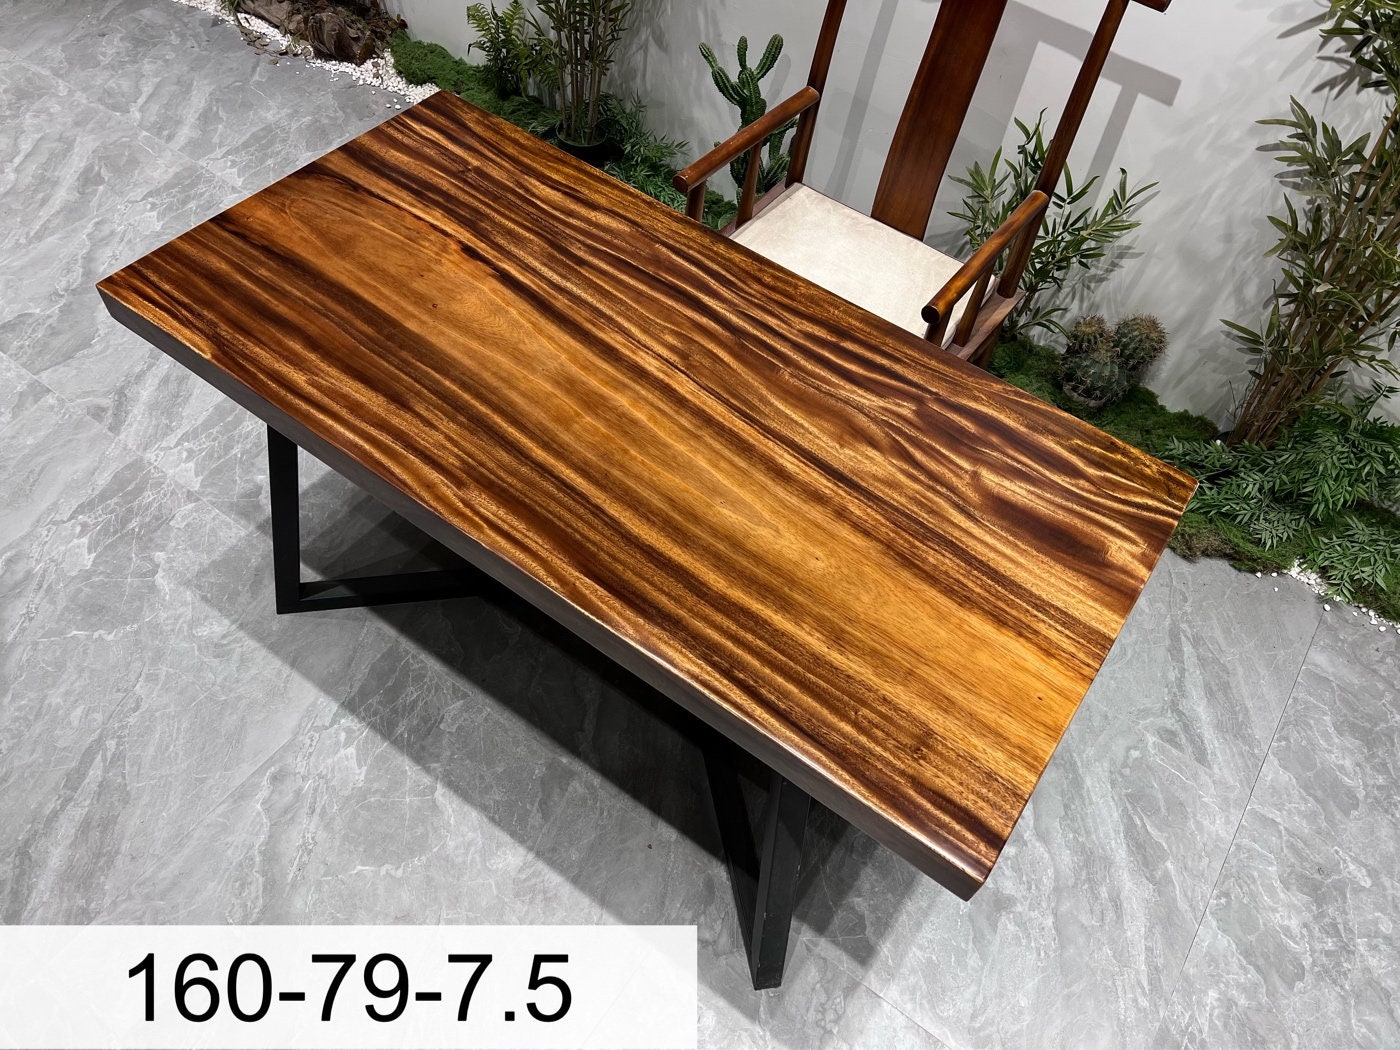 Coffee Table, Walnut slab, Dining table, Rustic Coffee Table, Kitchen table